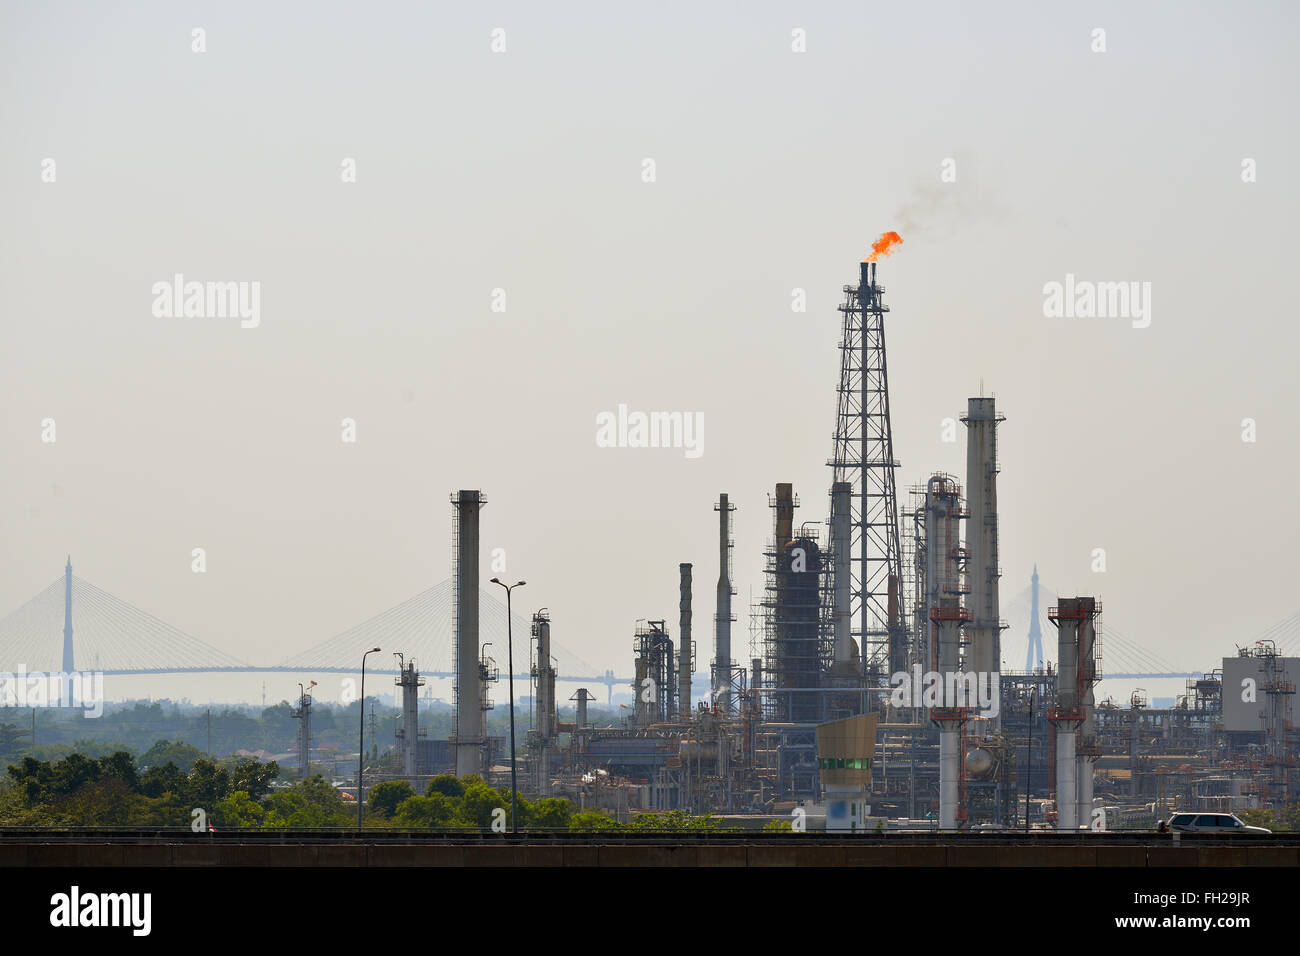 Oil refinery tower with exhausted flame Stock Photo